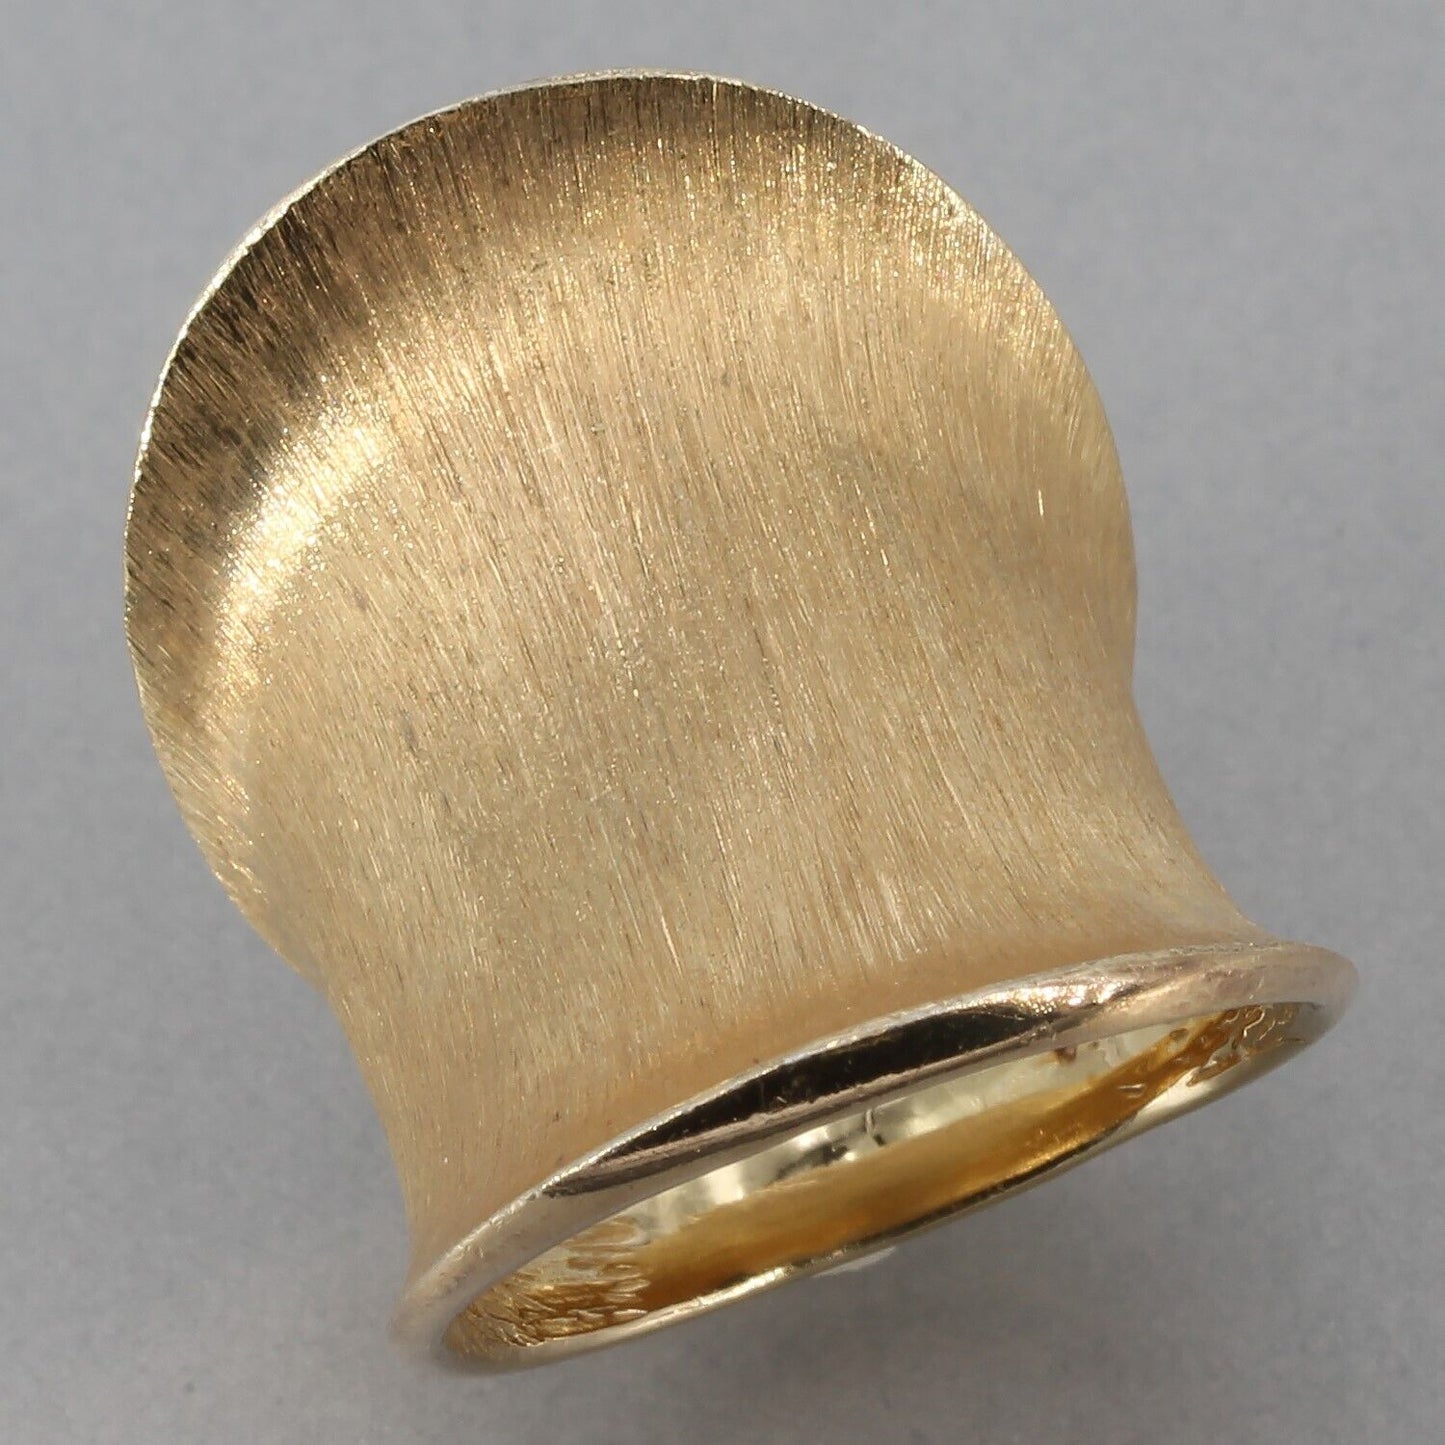 JCM Brush Textured Yellow Gold Plated Sterling 1" Wide Saddle Band Ring Size 6